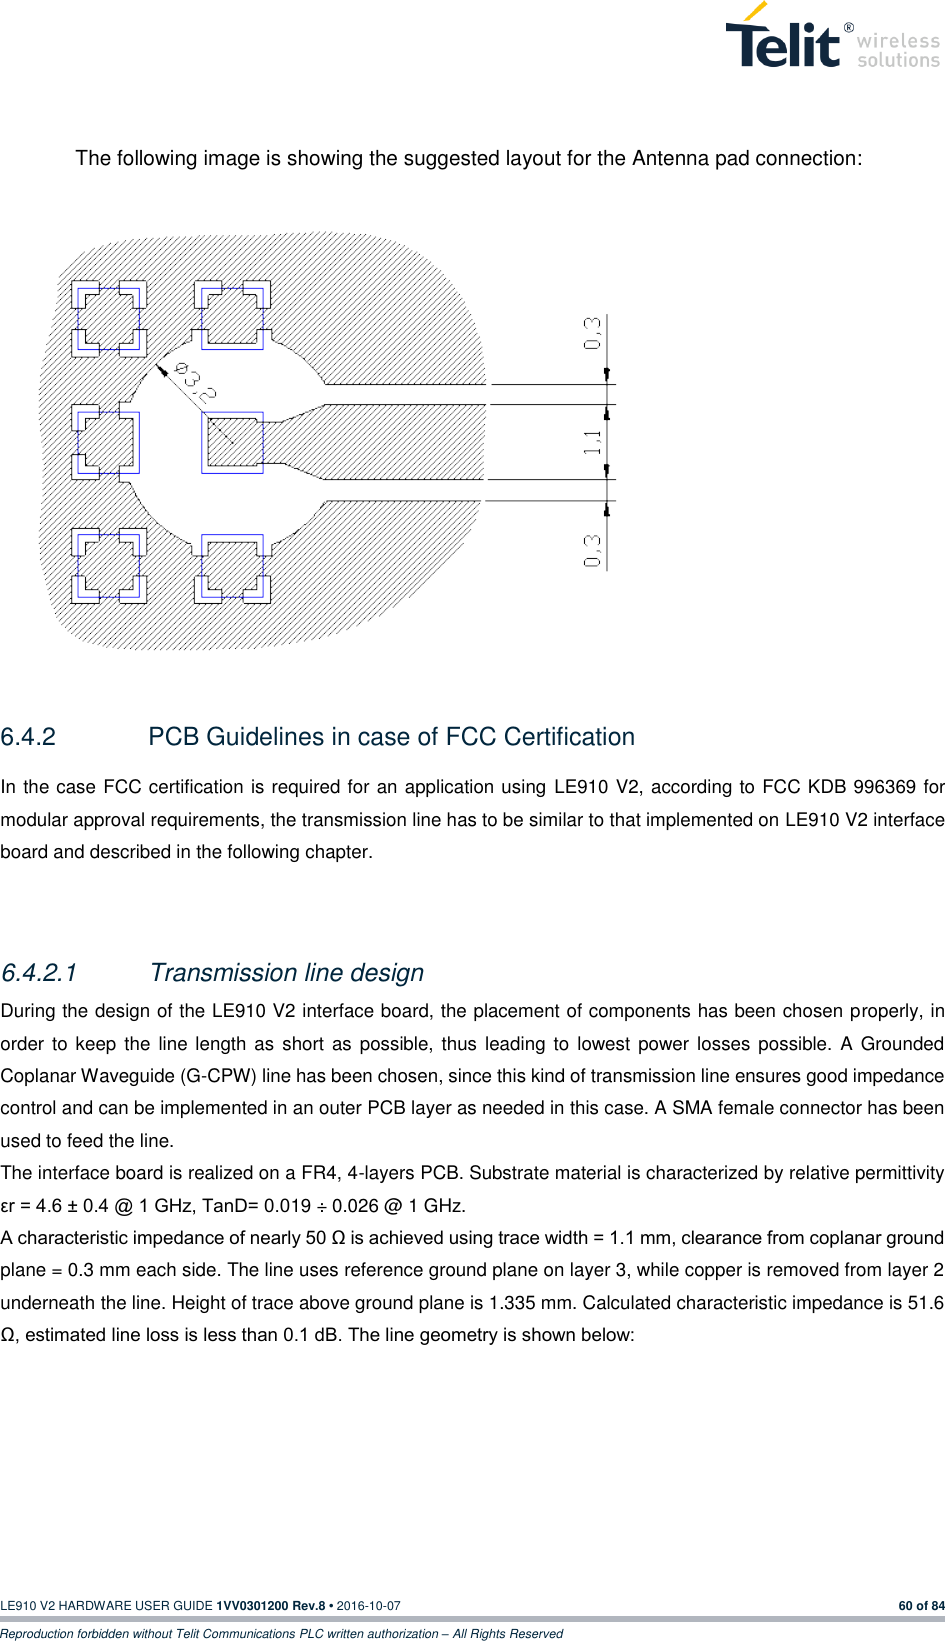   LE910 V2 HARDWARE USER GUIDE 1VV0301200 Rev.8 • 2016-10-07 60 of 84 Reproduction forbidden without Telit Communications PLC written authorization – All Rights Reserved  The following image is showing the suggested layout for the Antenna pad connection:               6.4.2  PCB Guidelines in case of FCC Certification In the case FCC certification is required for an application using LE910 V2, according to FCC KDB 996369 for modular approval requirements, the transmission line has to be similar to that implemented on LE910 V2 interface board and described in the following chapter.  6.4.2.1  Transmission line design During the design of the LE910 V2 interface board, the placement of components has been chosen properly, in order  to keep  the  line length as  short  as possible, thus leading to  lowest power losses possible. A Grounded Coplanar Waveguide (G-CPW) line has been chosen, since this kind of transmission line ensures good impedance control and can be implemented in an outer PCB layer as needed in this case. A SMA female connector has been used to feed the line. The interface board is realized on a FR4, 4-layers PCB. Substrate material is characterized by relative permittivity εr = 4.6 ± 0.4 @ 1 GHz, TanD= 0.019 ÷ 0.026 @ 1 GHz. A characteristic impedance of nearly 50 Ω is achieved using trace width = 1.1 mm, clearance from coplanar ground plane = 0.3 mm each side. The line uses reference ground plane on layer 3, while copper is removed from layer 2 underneath the line. Height of trace above ground plane is 1.335 mm. Calculated characteristic impedance is 51.6 Ω, estimated line loss is less than 0.1 dB. The line geometry is shown below: 